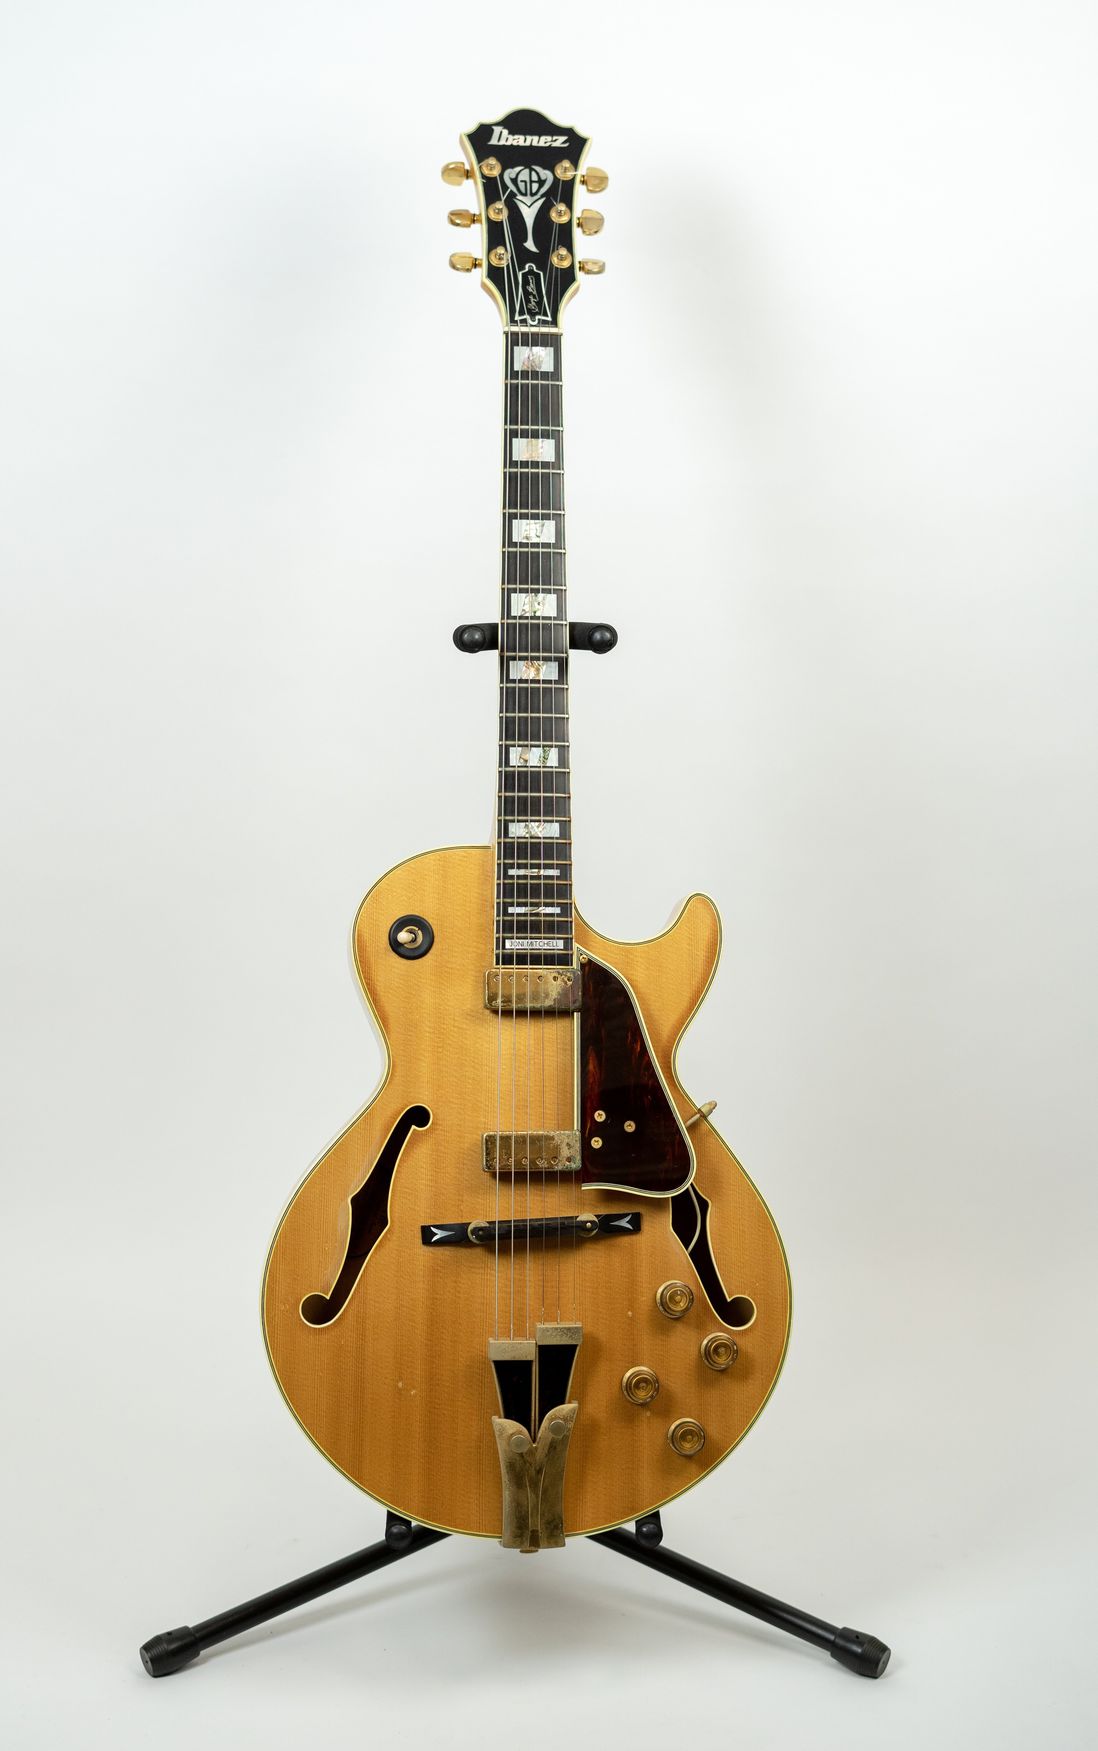 Joni Mitchell used this Ibanez archtop on the 1979 live album "Shadows and Light" and also on the 1983 Refuge World Tour.